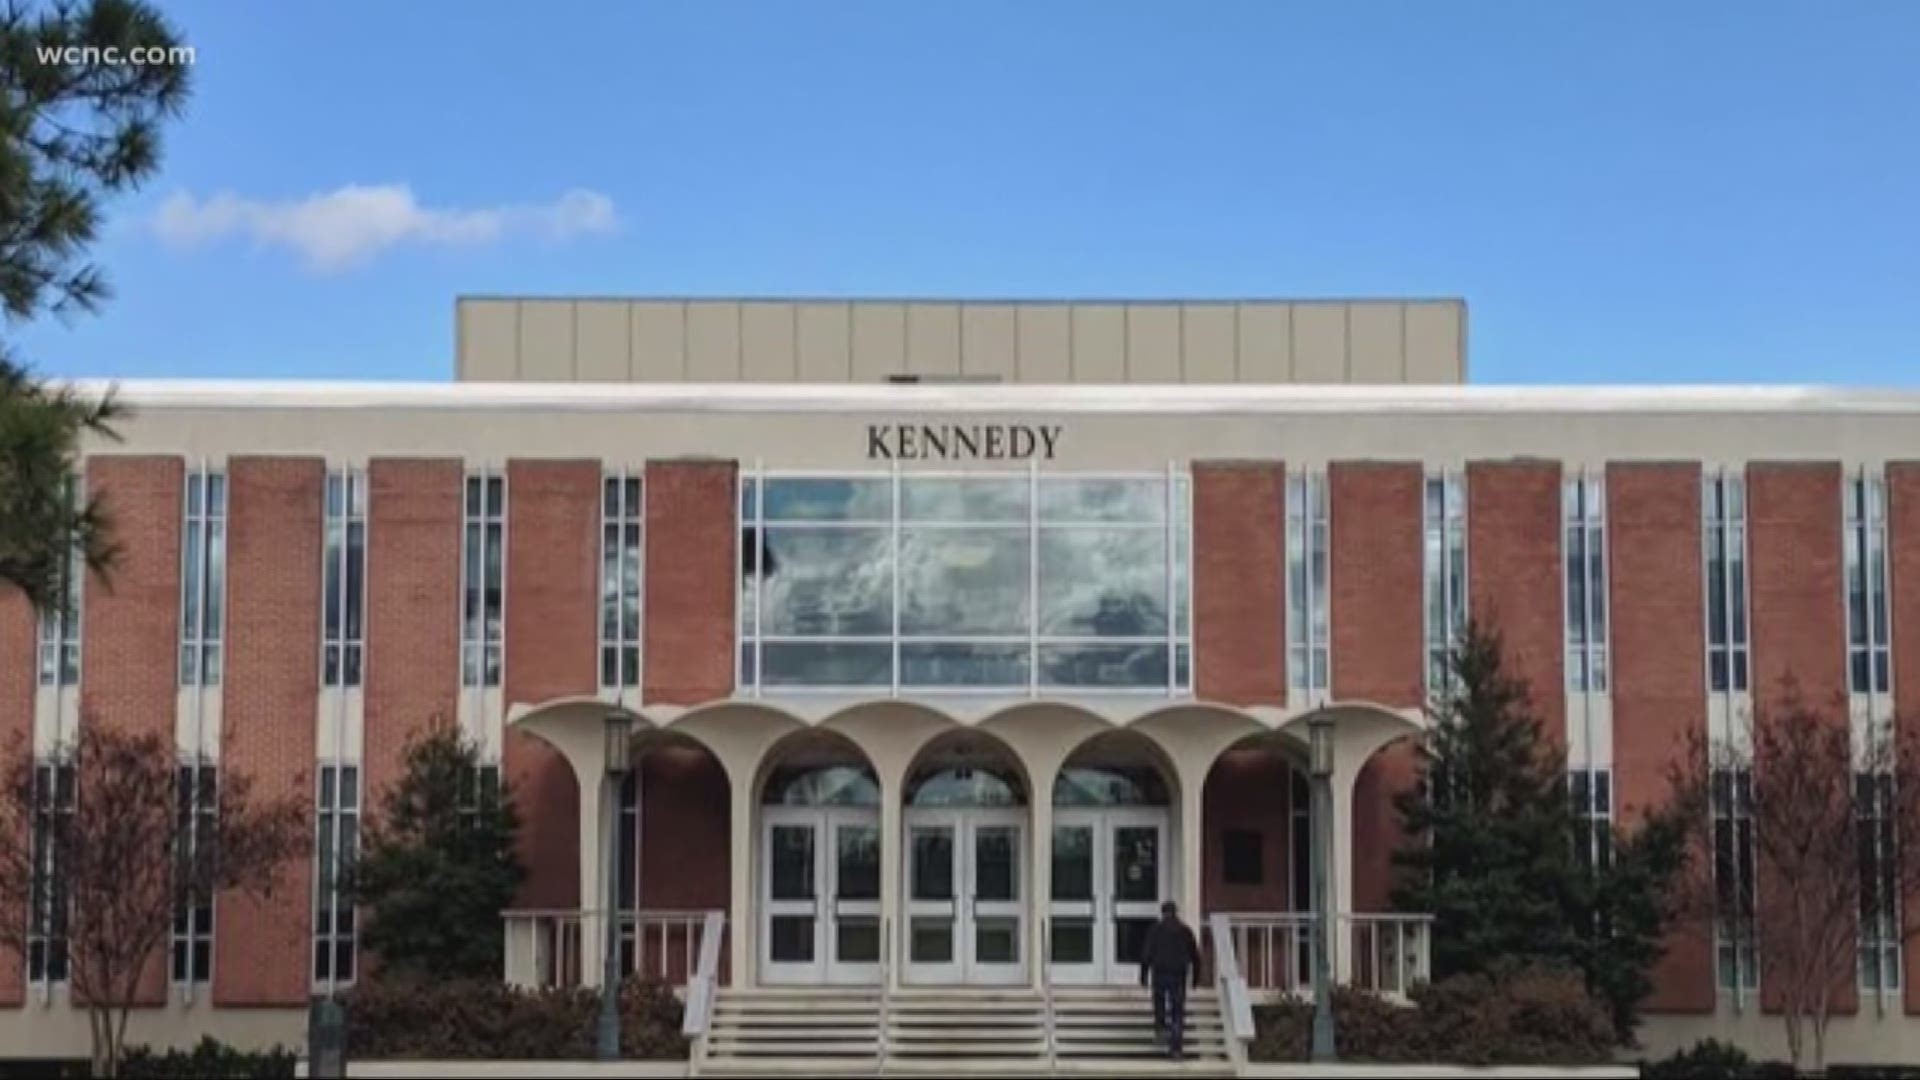 In a statement to students and staff, Chancellor Philip Dubois said the space in Kennedy Hall will not be used "for any purpose" for the upcoming academic year.